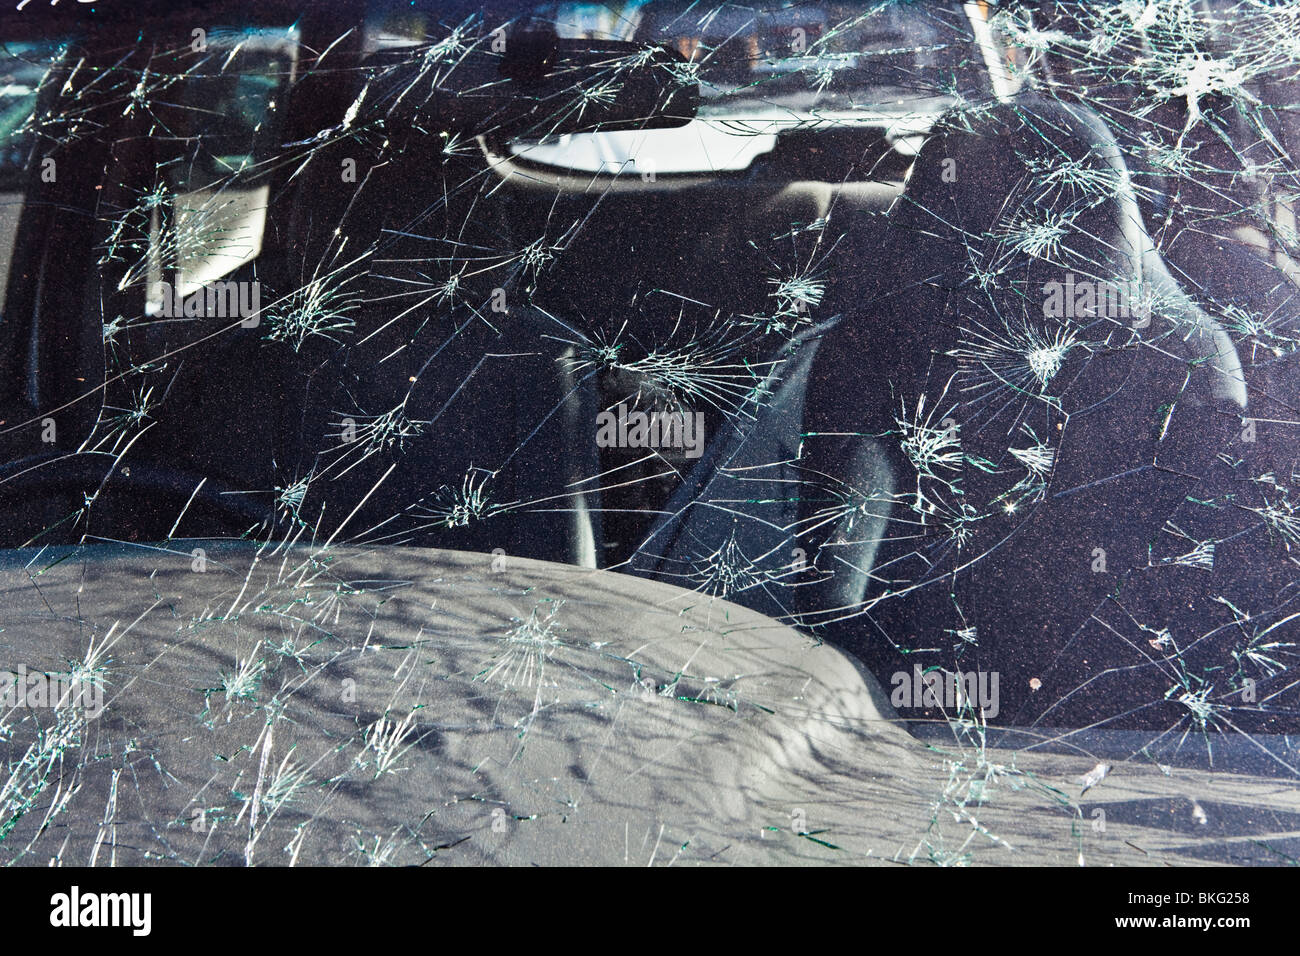 Cracked car windscreen from hail storm damage Stock Photo